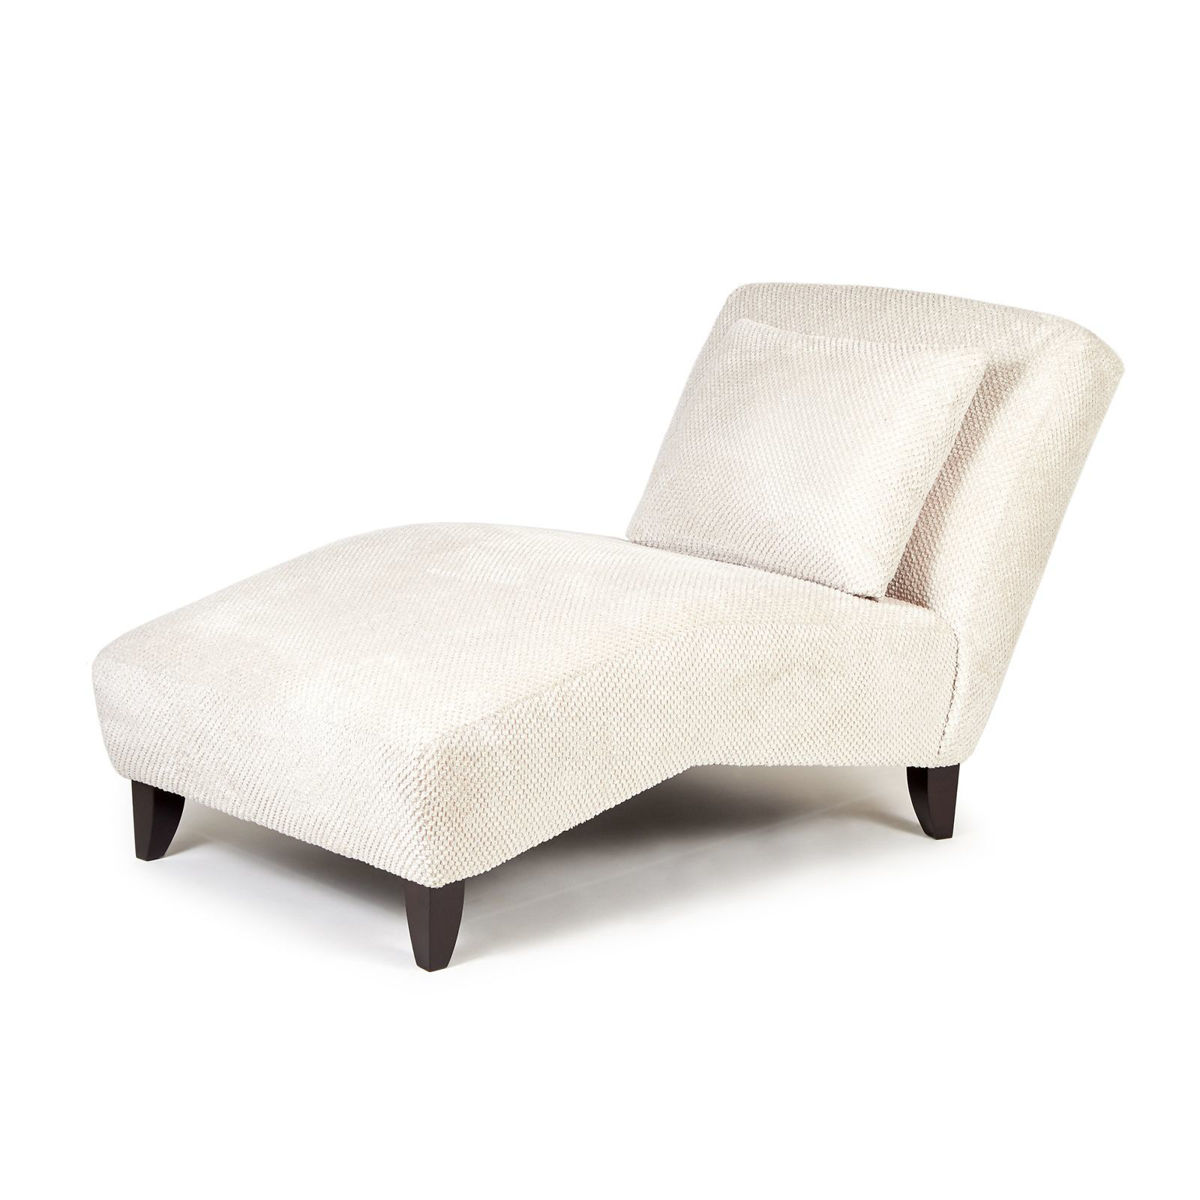 Picture of Davos Pebble Chaise